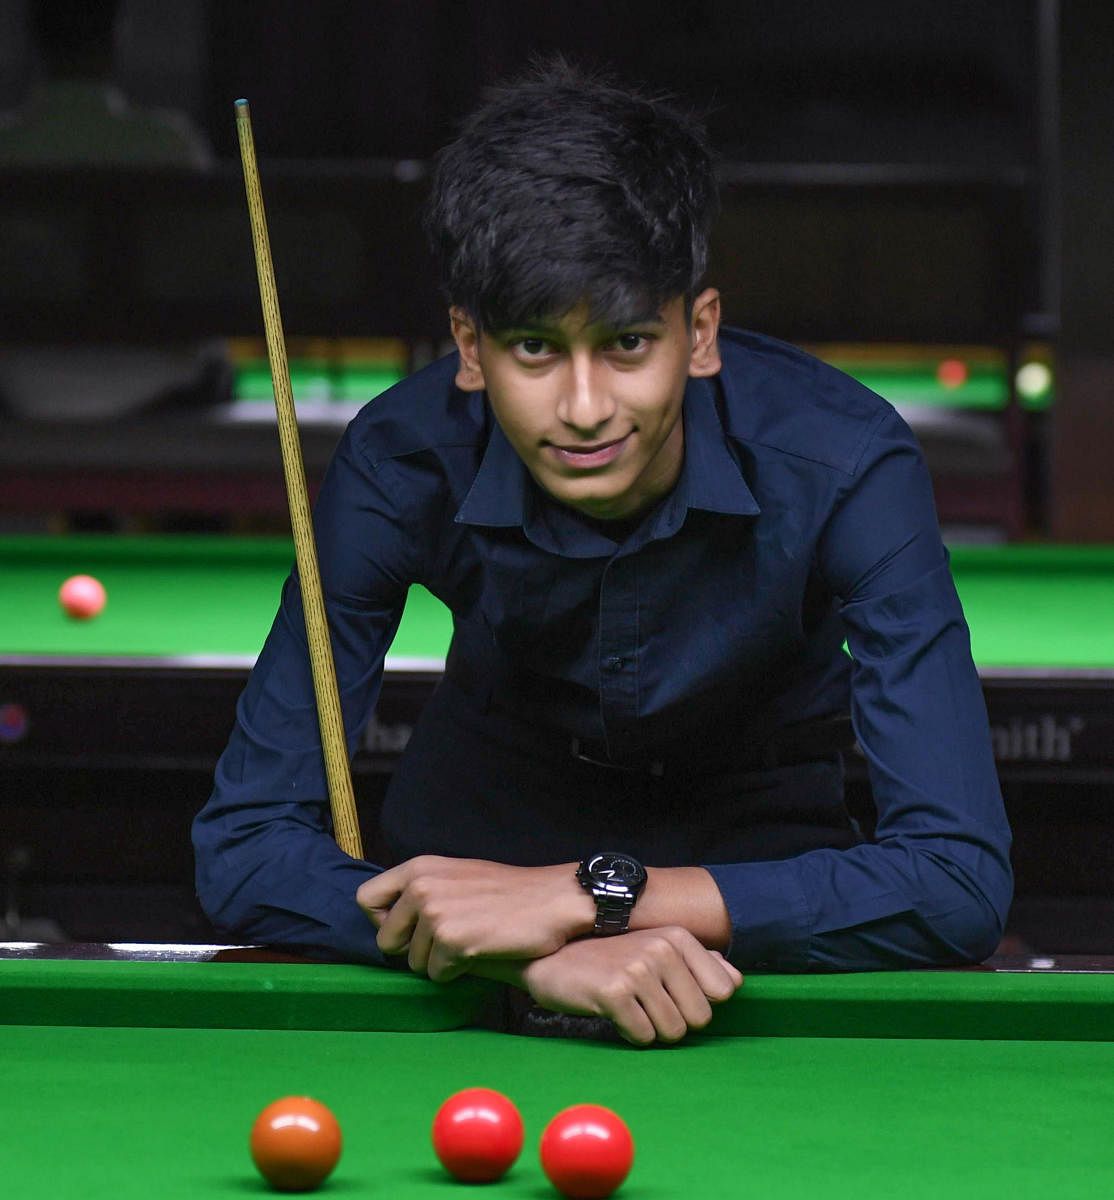 Sibling race turned into Zubin’s craze for baize